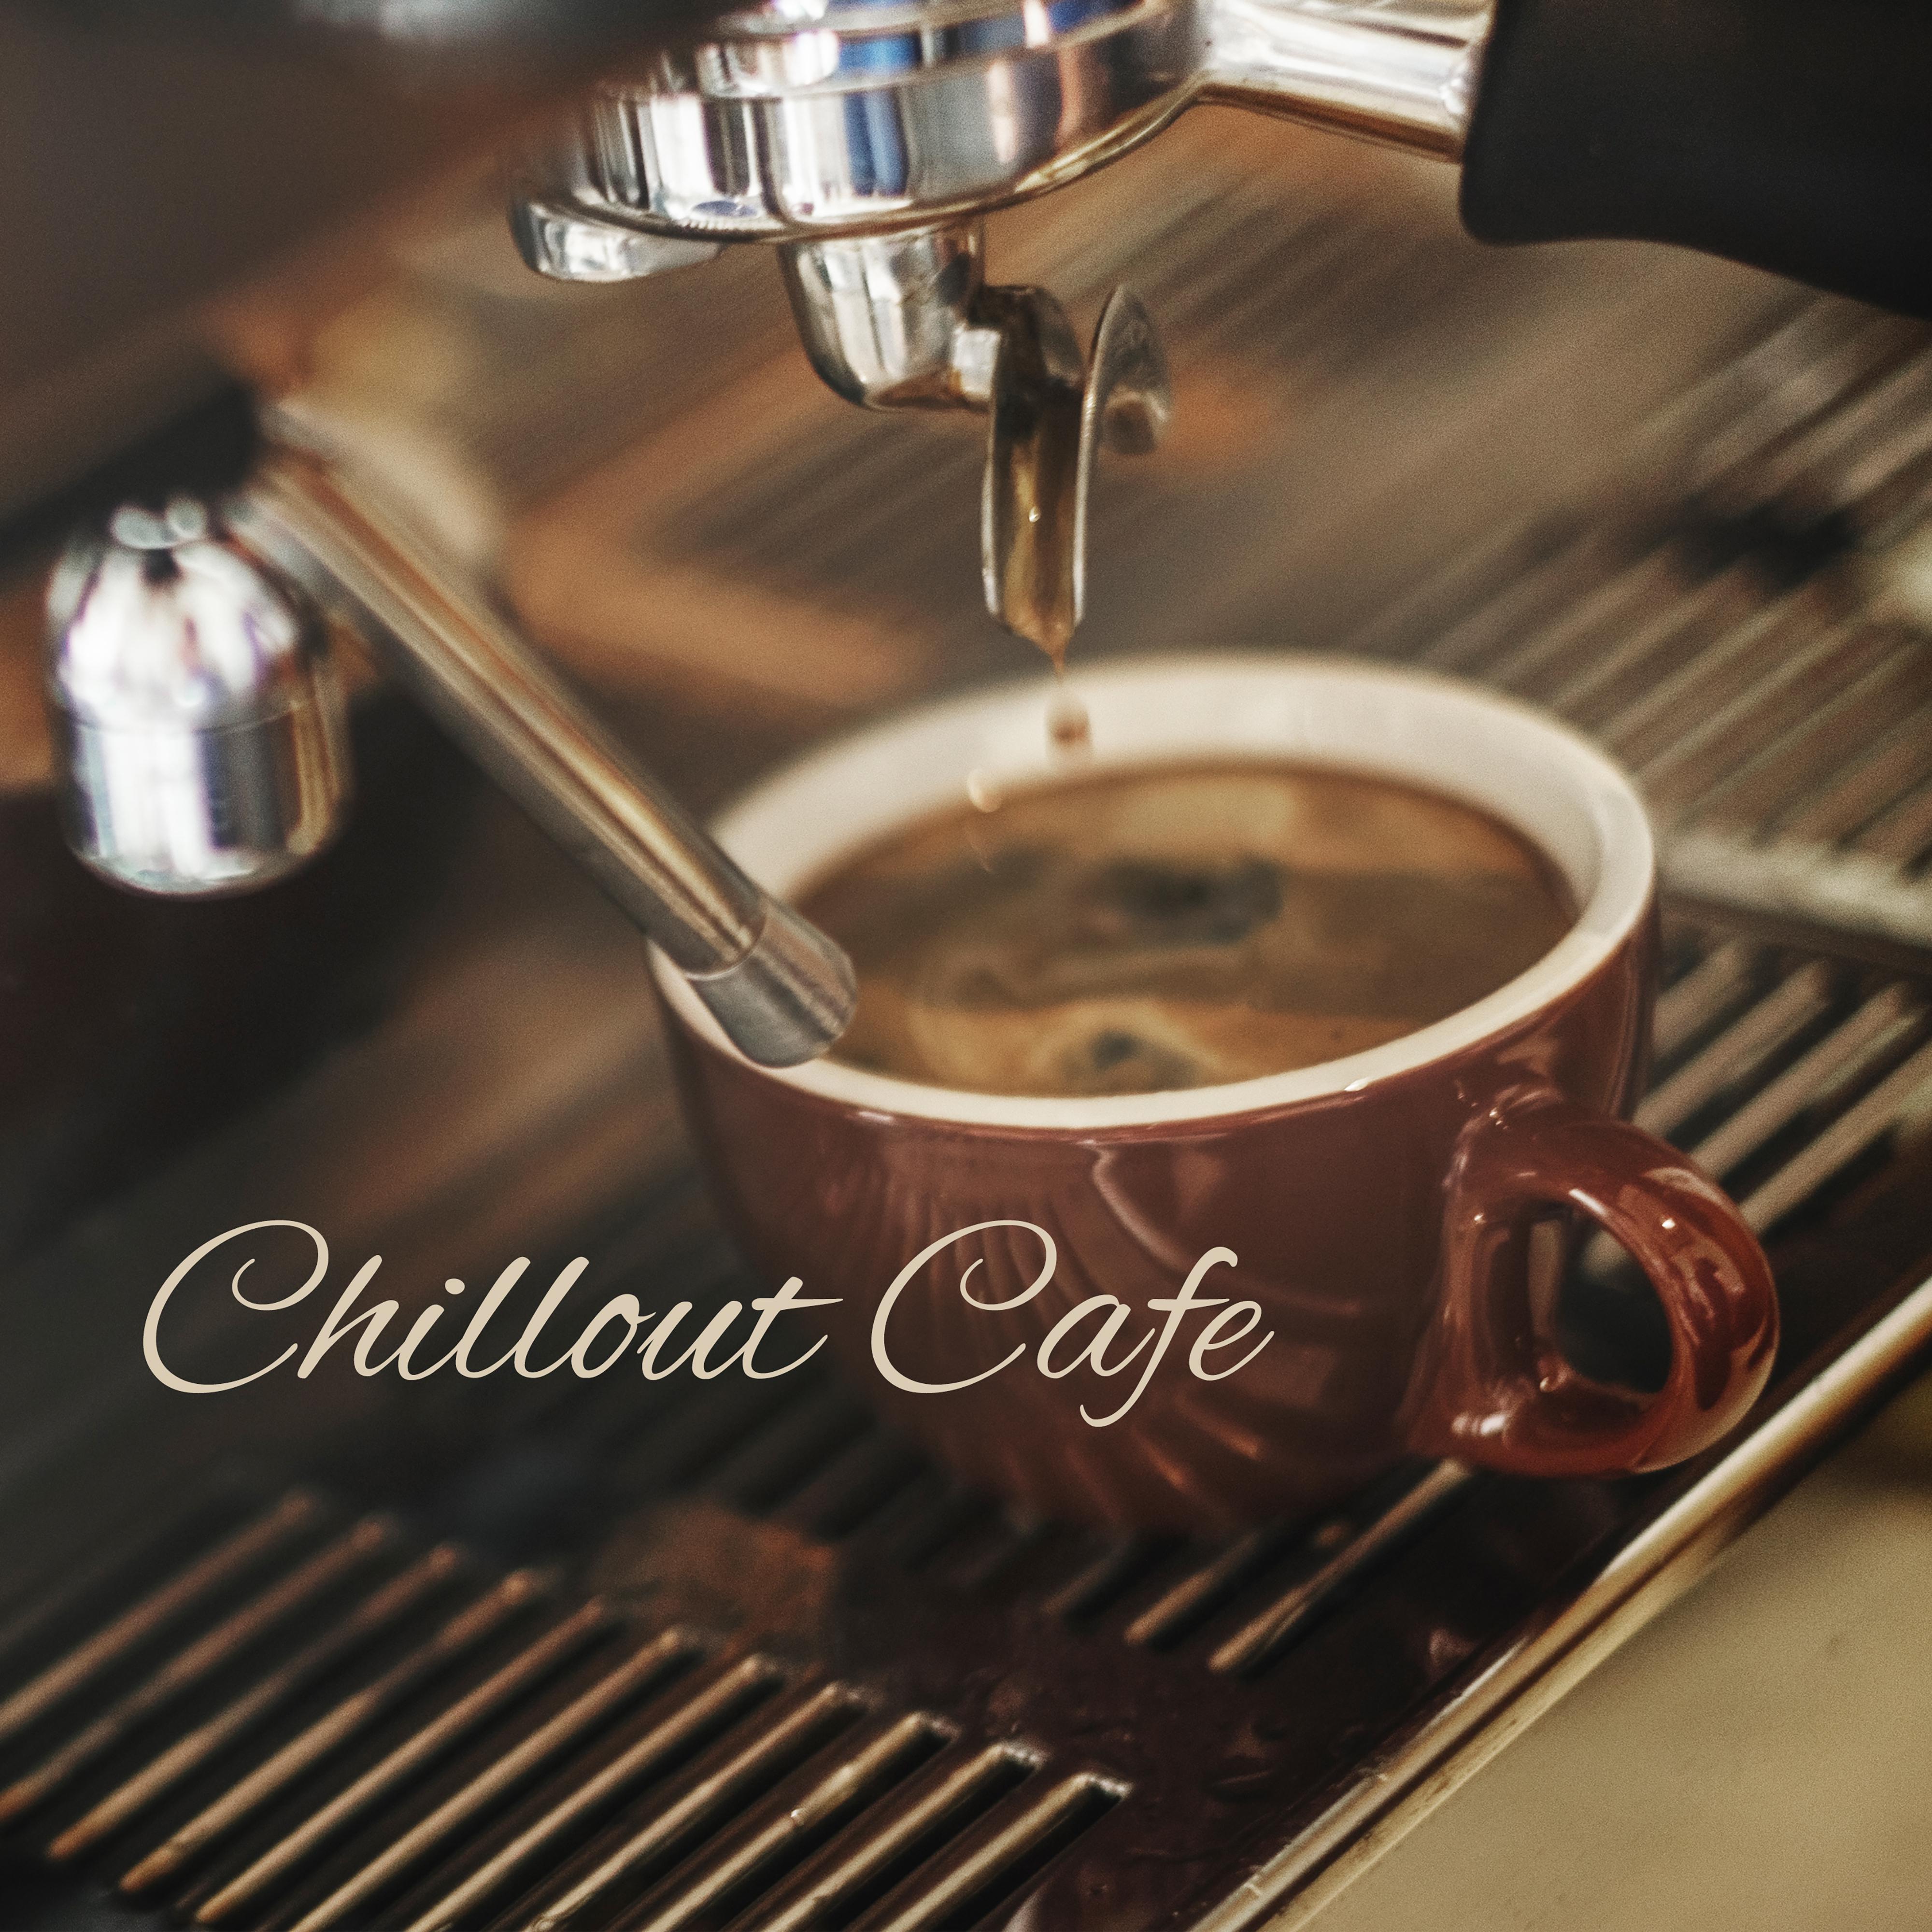 Chillout Cafe – Smooth Chillout Music, Bossa Nova, Essential Chillout, Cafe Music